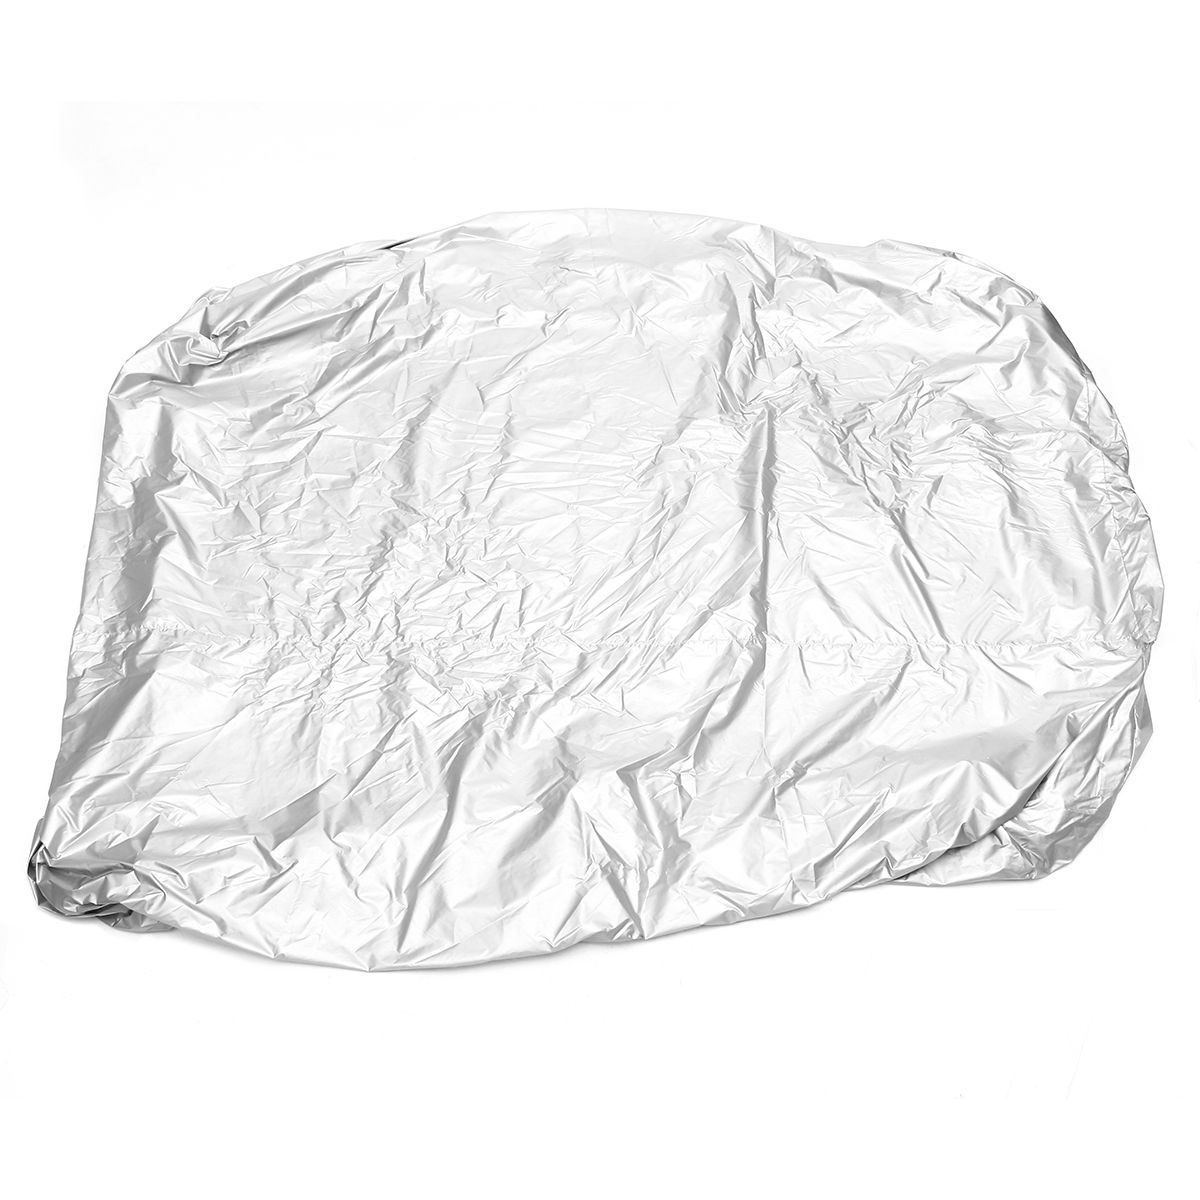 78Ft-4-Types-Silver-UV-Proof-Spa-Hot-Tub-Cover-Cap-for-Jacuzzi-Hotspring-Calspa-1731522